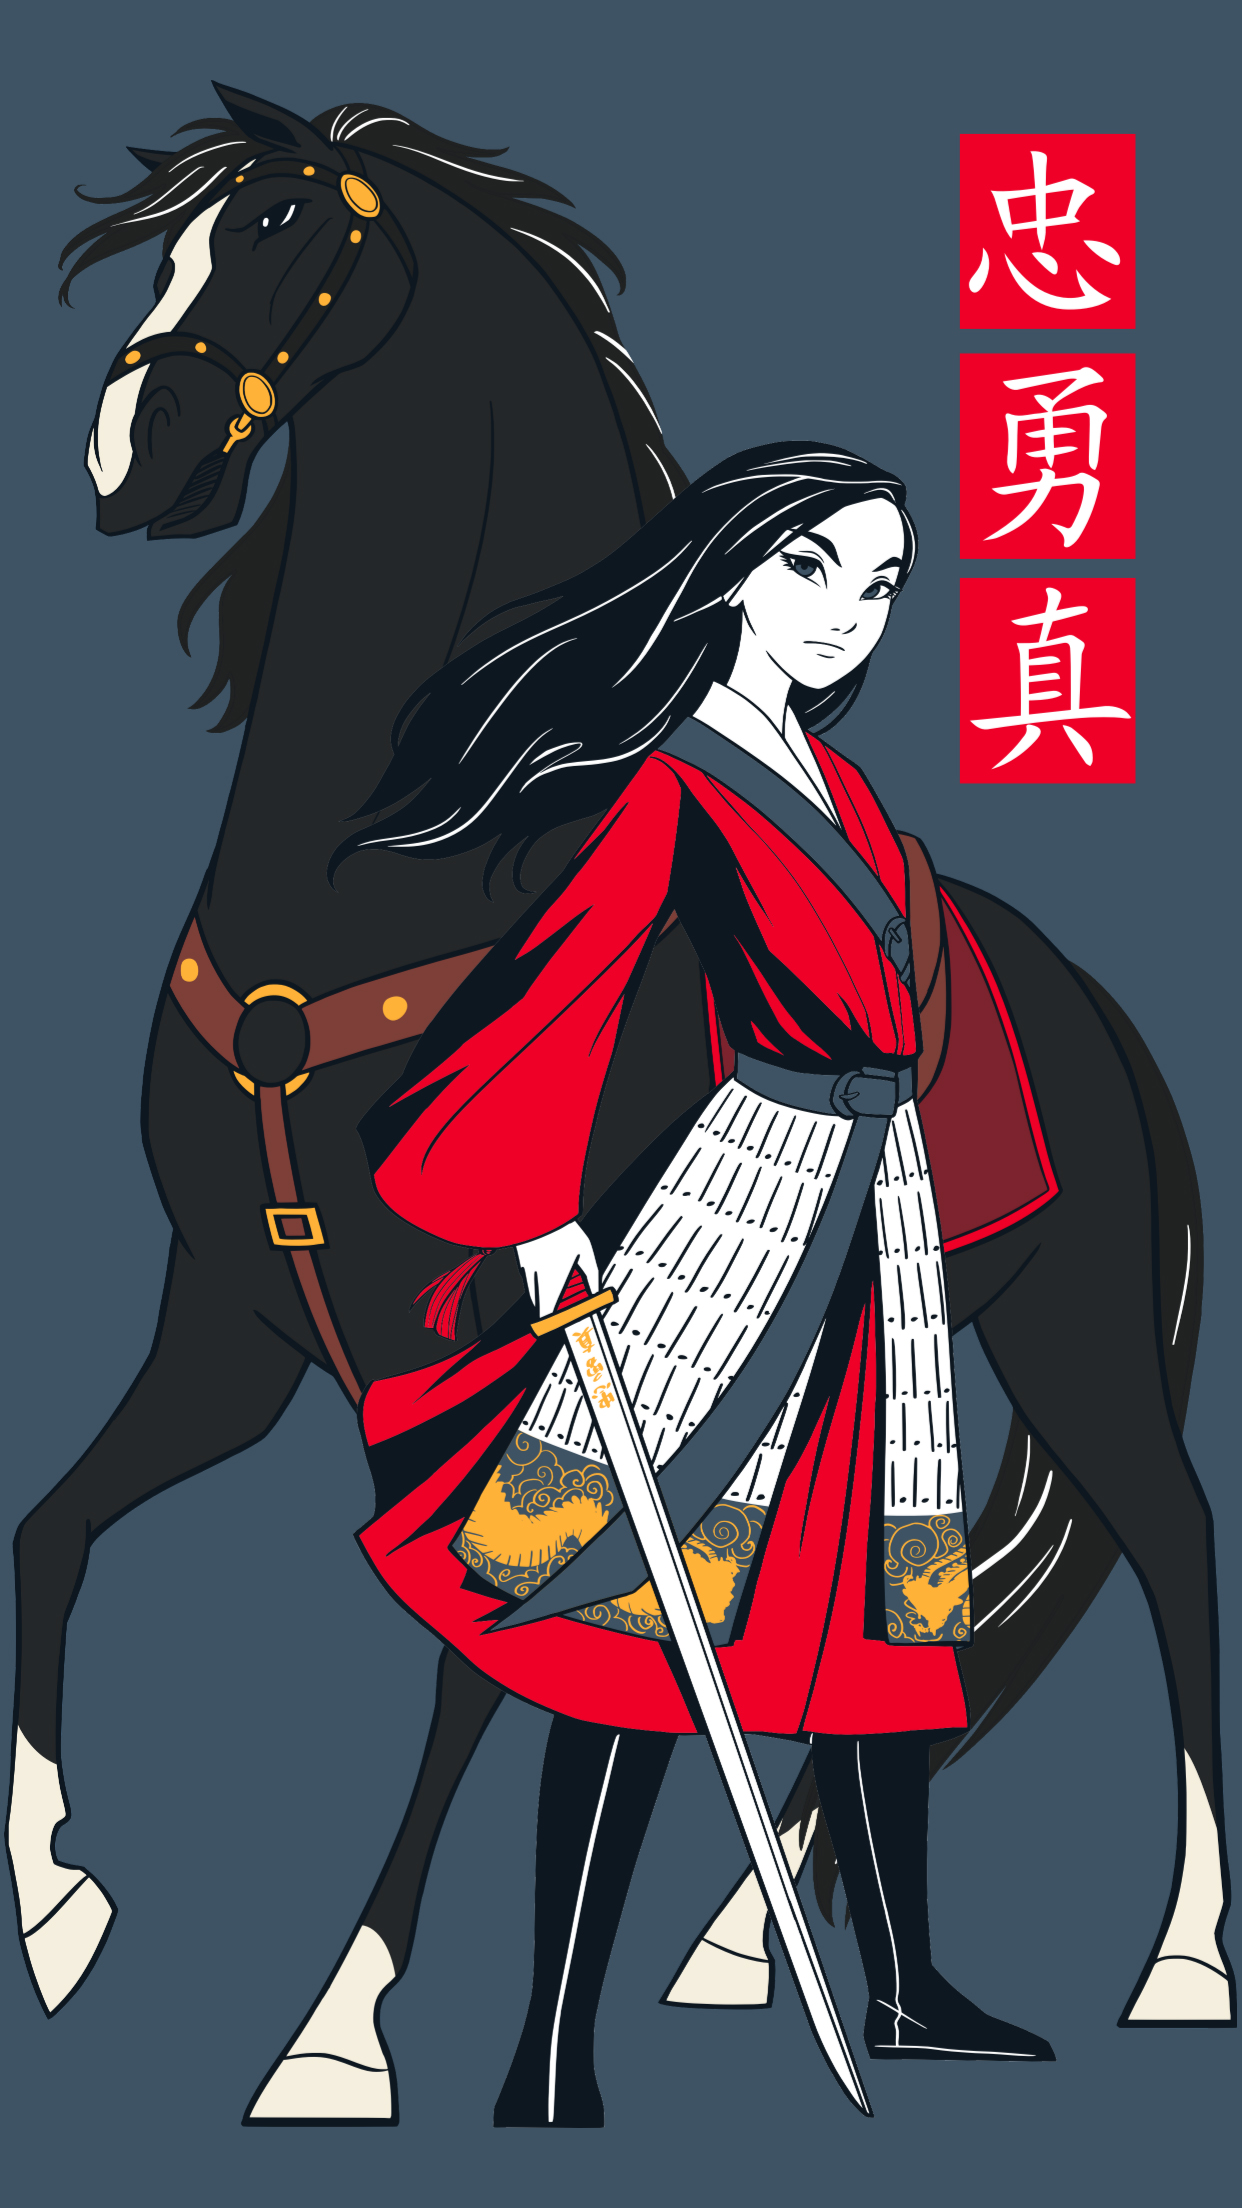 Phone wallpapers: Disney Mulan Live Action 2020 anime illustration style -  